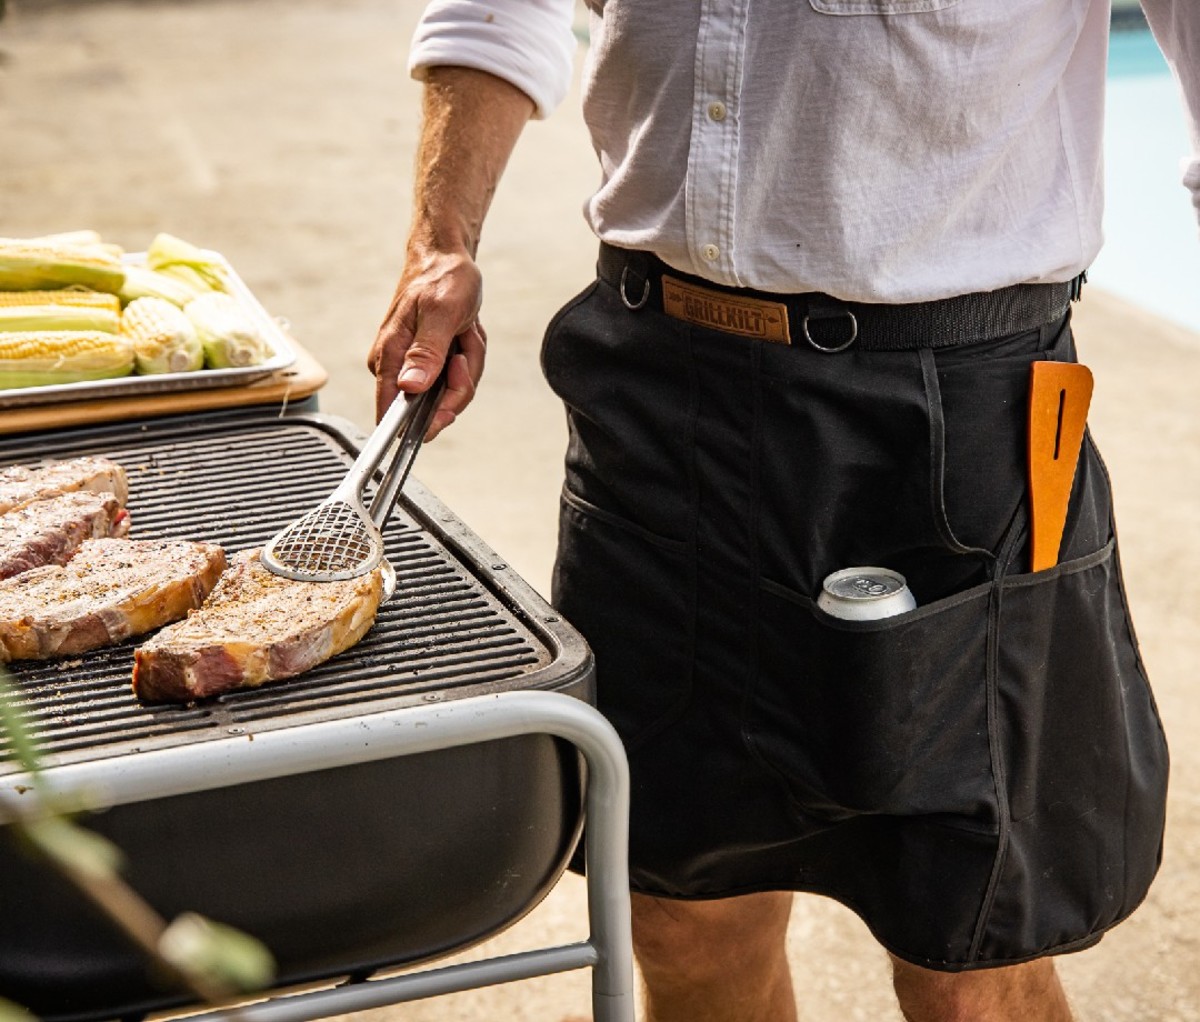 A man grilling while wearing a grillkilt.